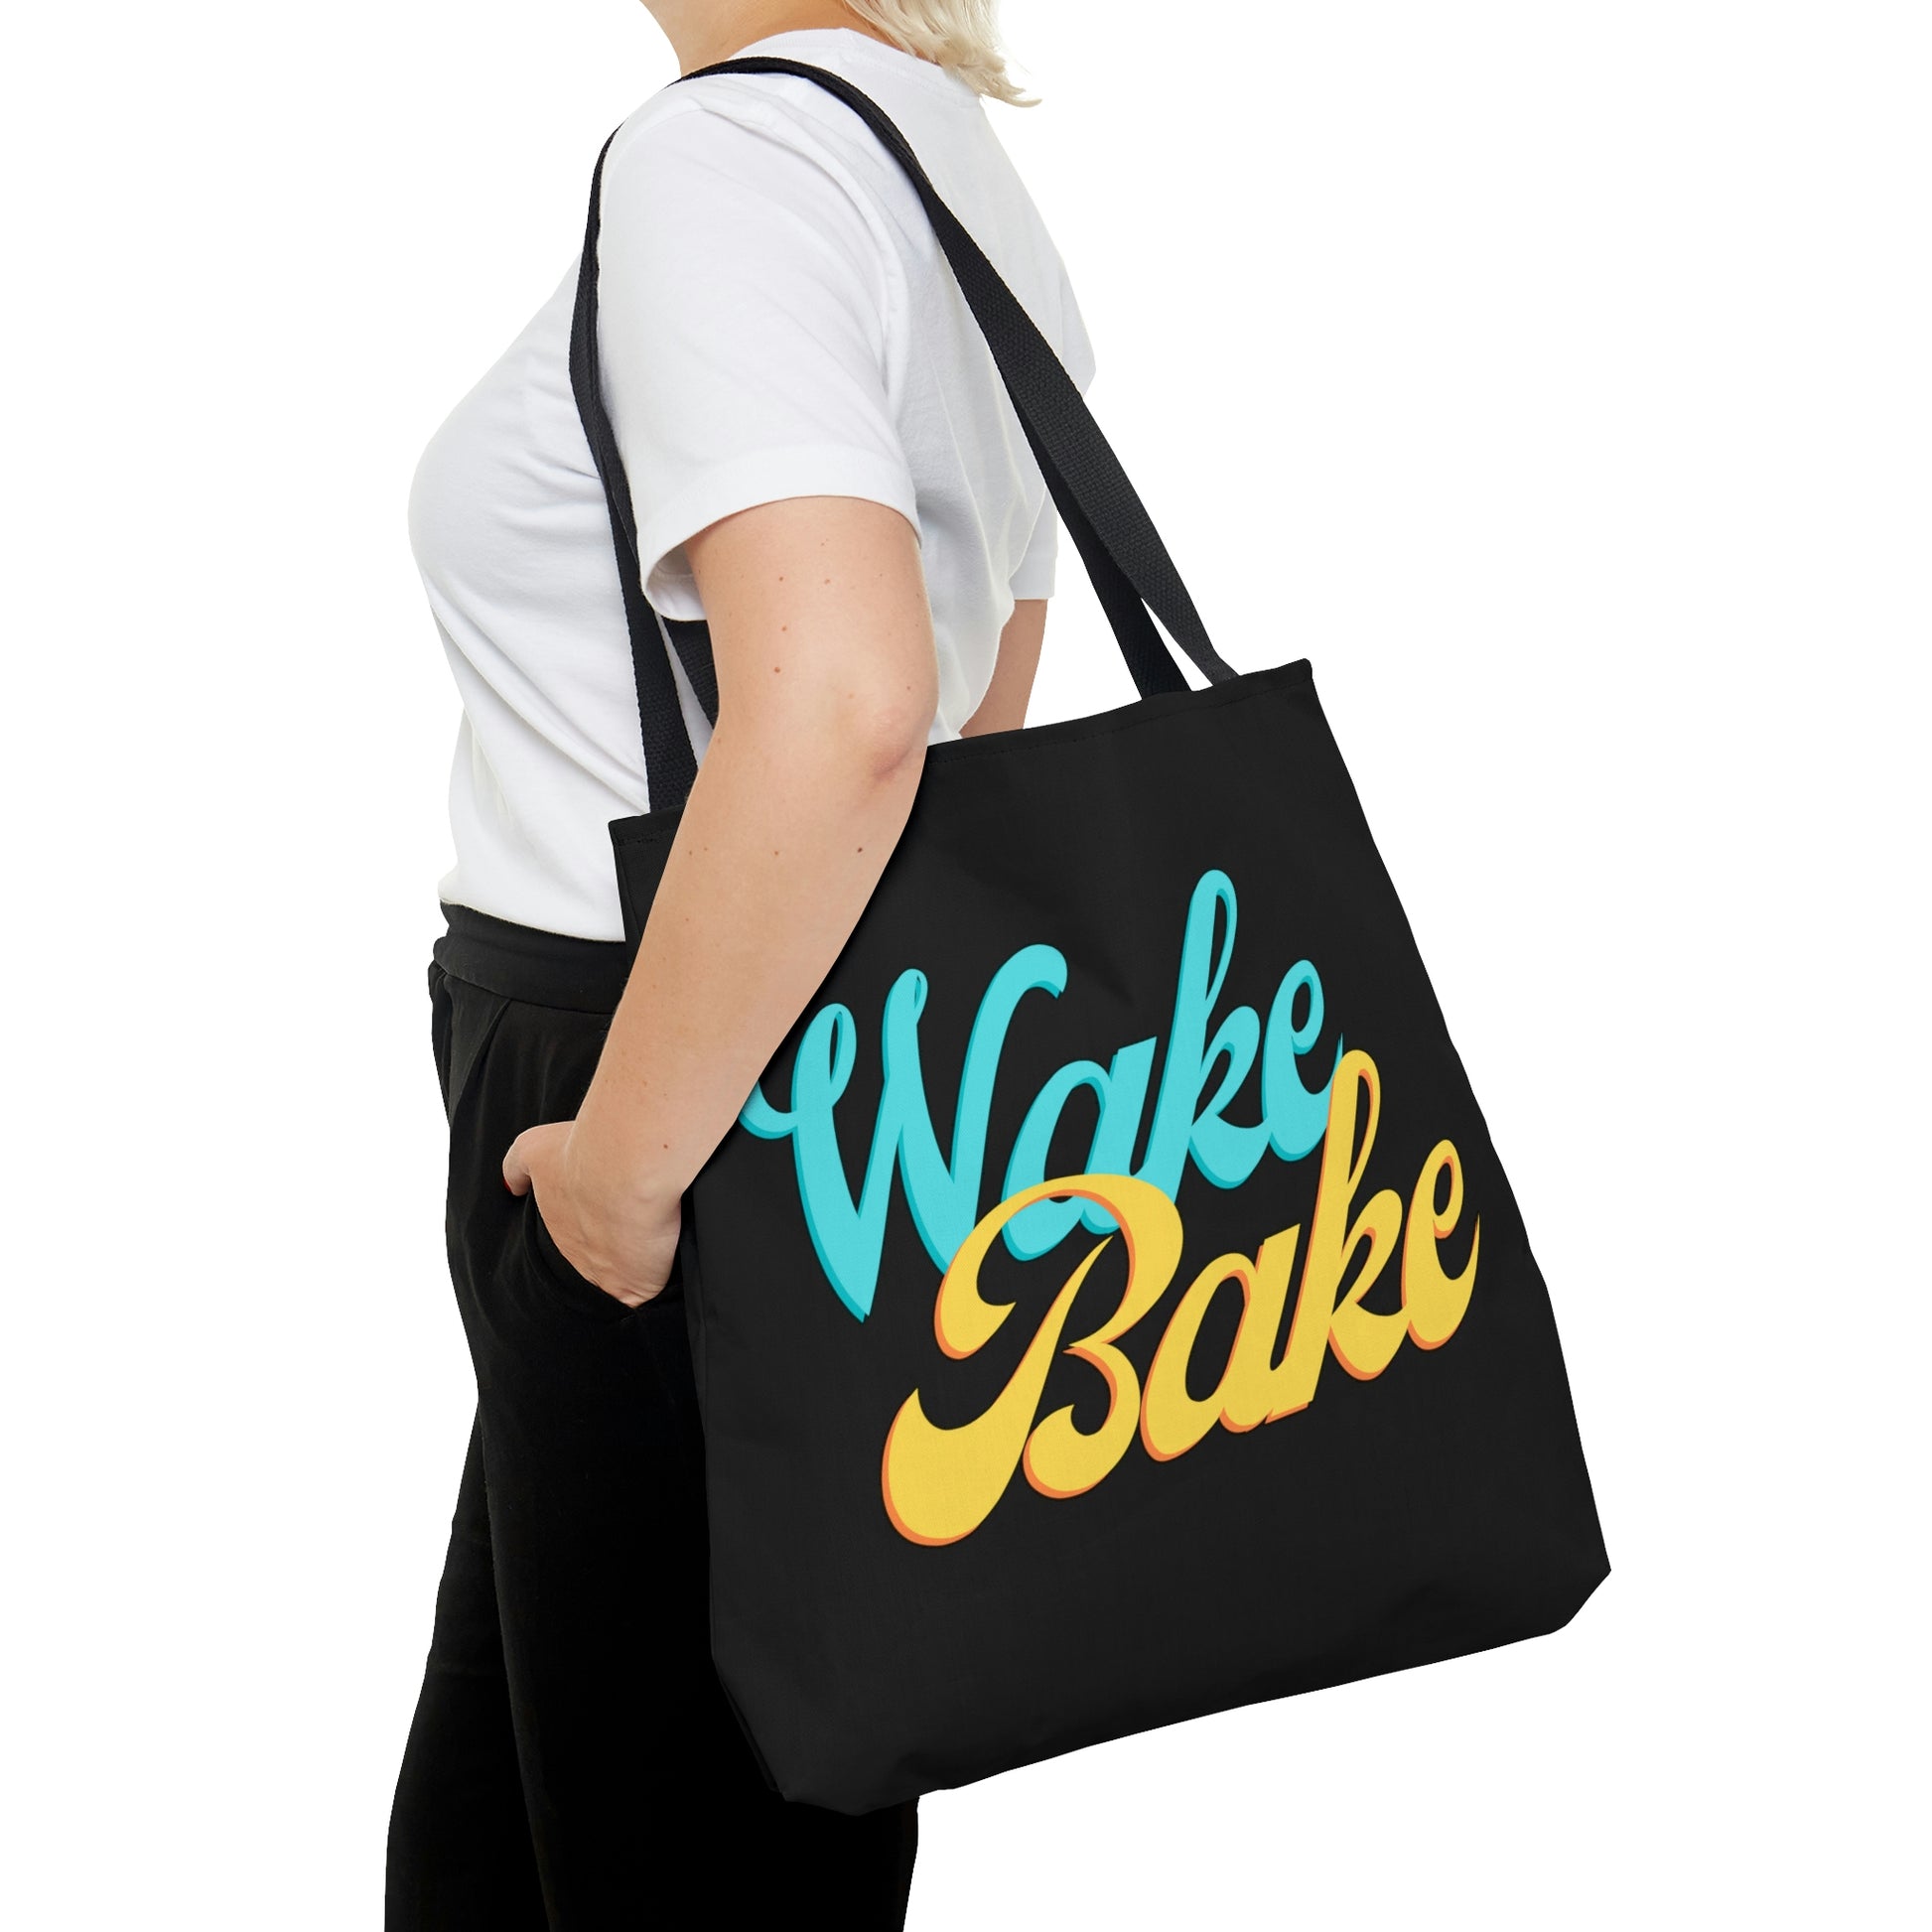 A woman is walking forward as she poses in the wake and bake Black Tote Bag